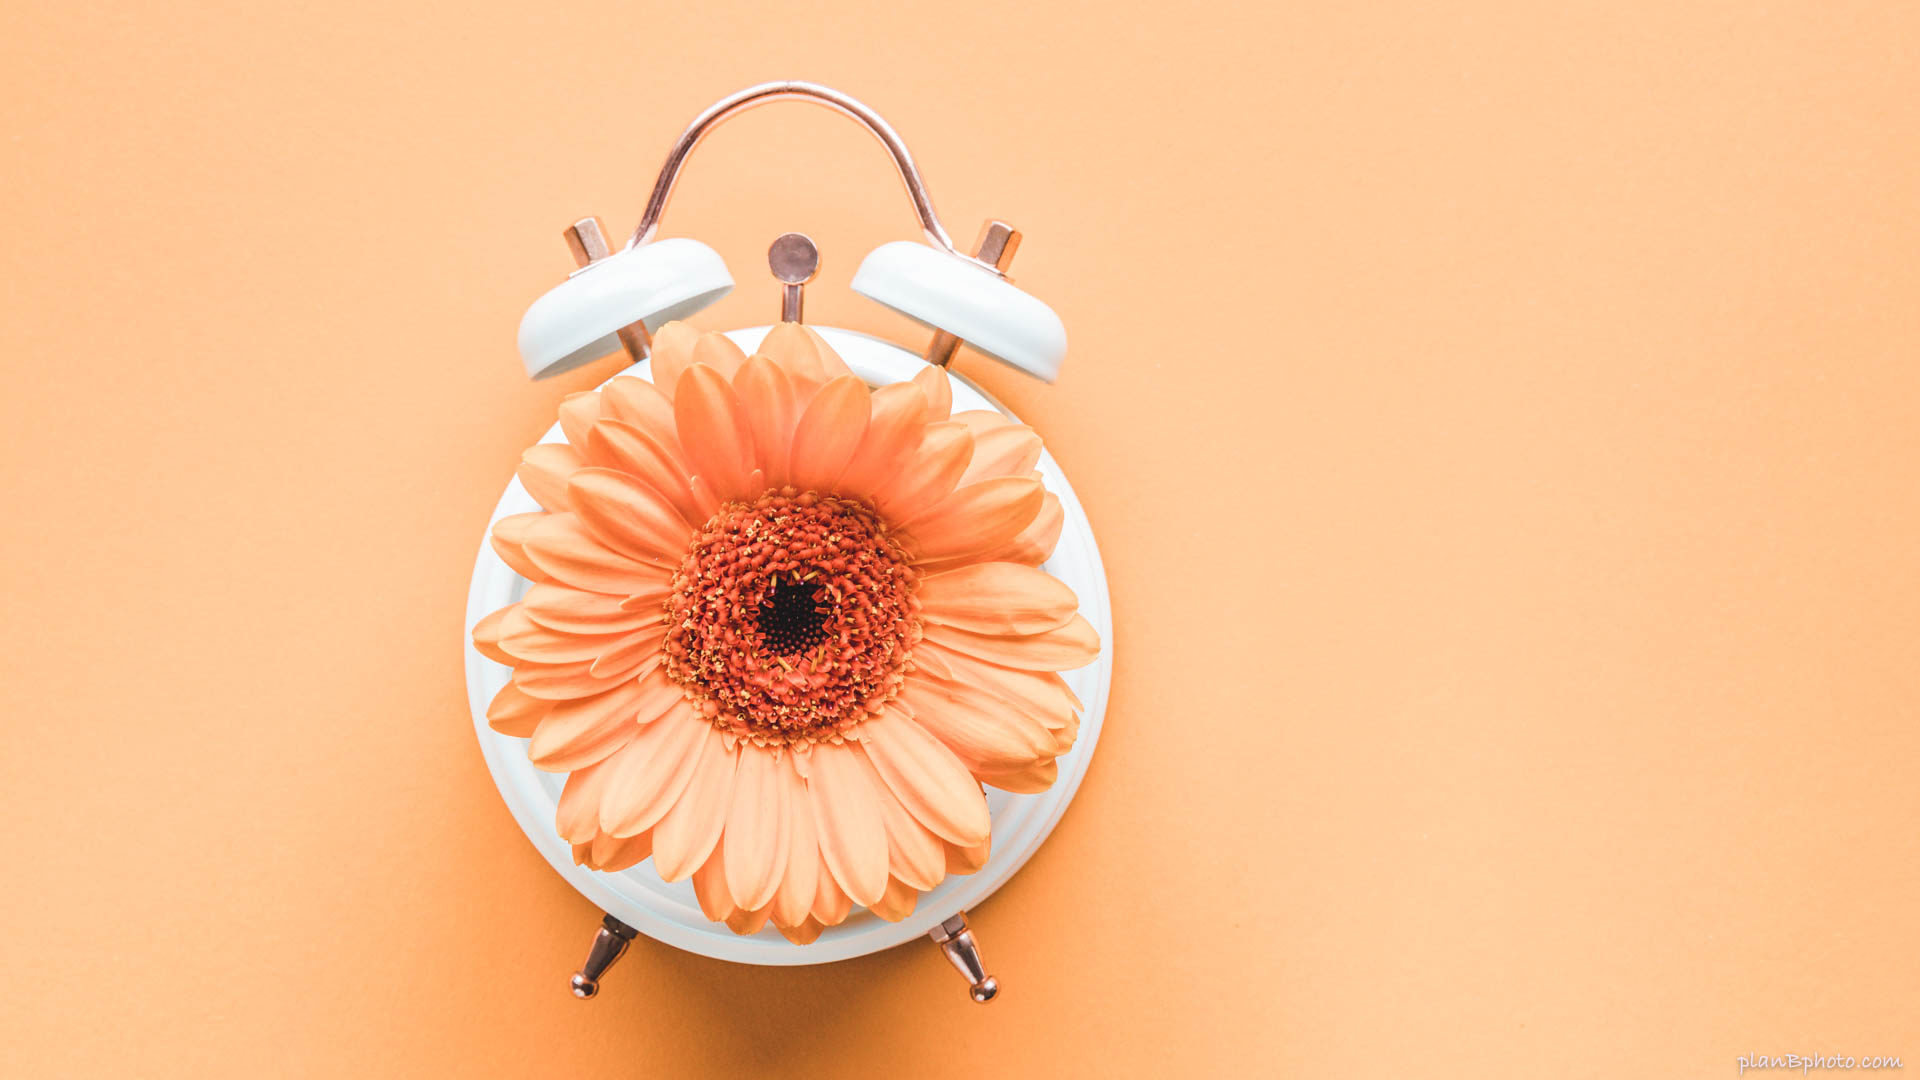 Flat lay of orange flower on a classic white bell alarm clock against an orange background